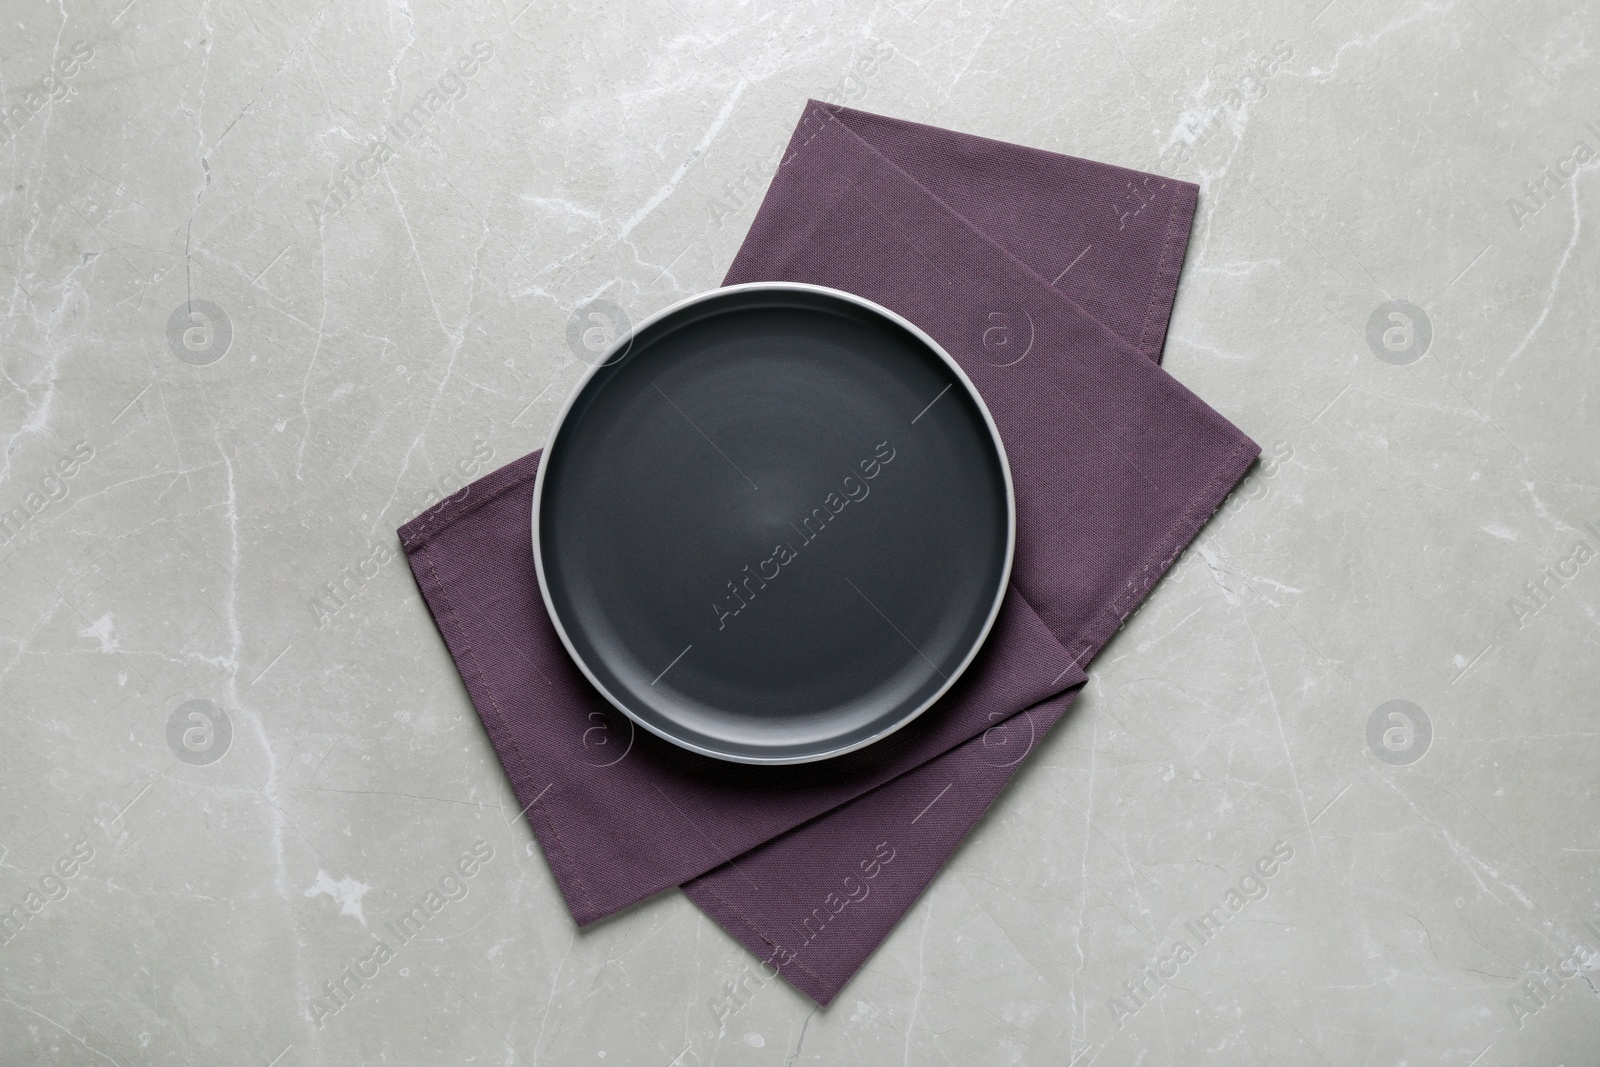 Photo of New dark plate and napkin on light grey table, top view